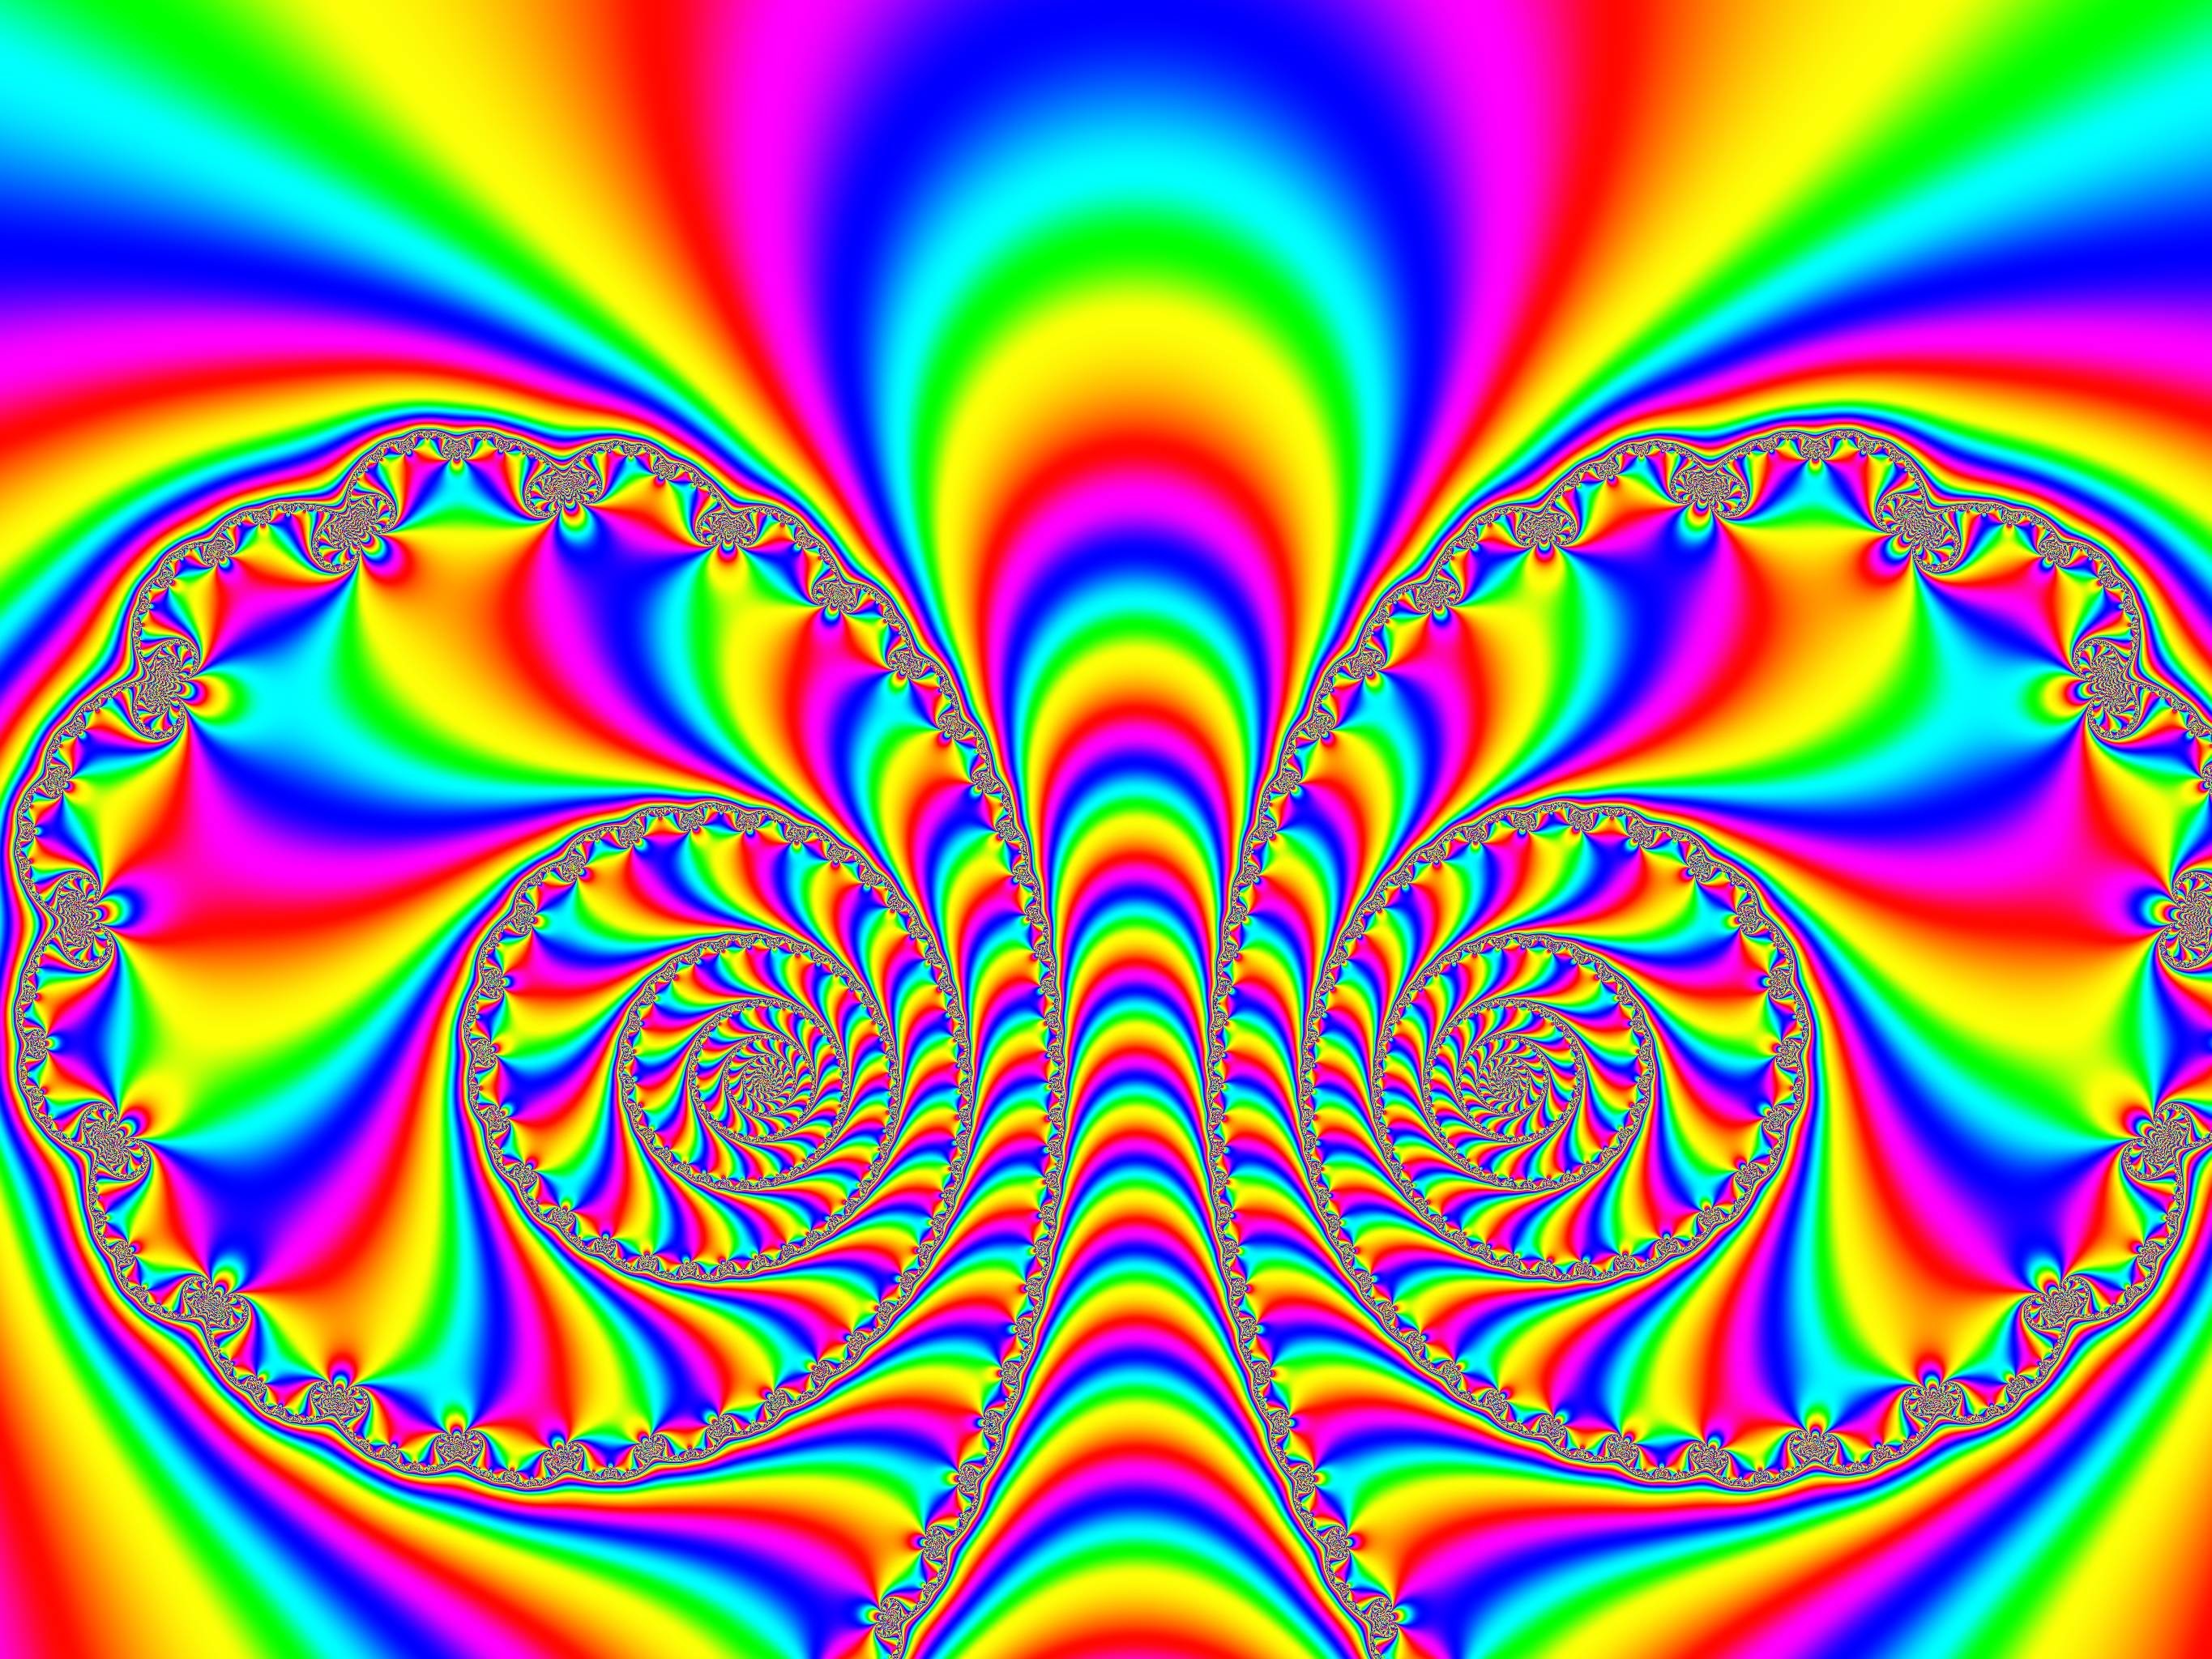 Trippy wallpapers are unique desktop backgrounds that create powerful  optical illusions for your eyes.